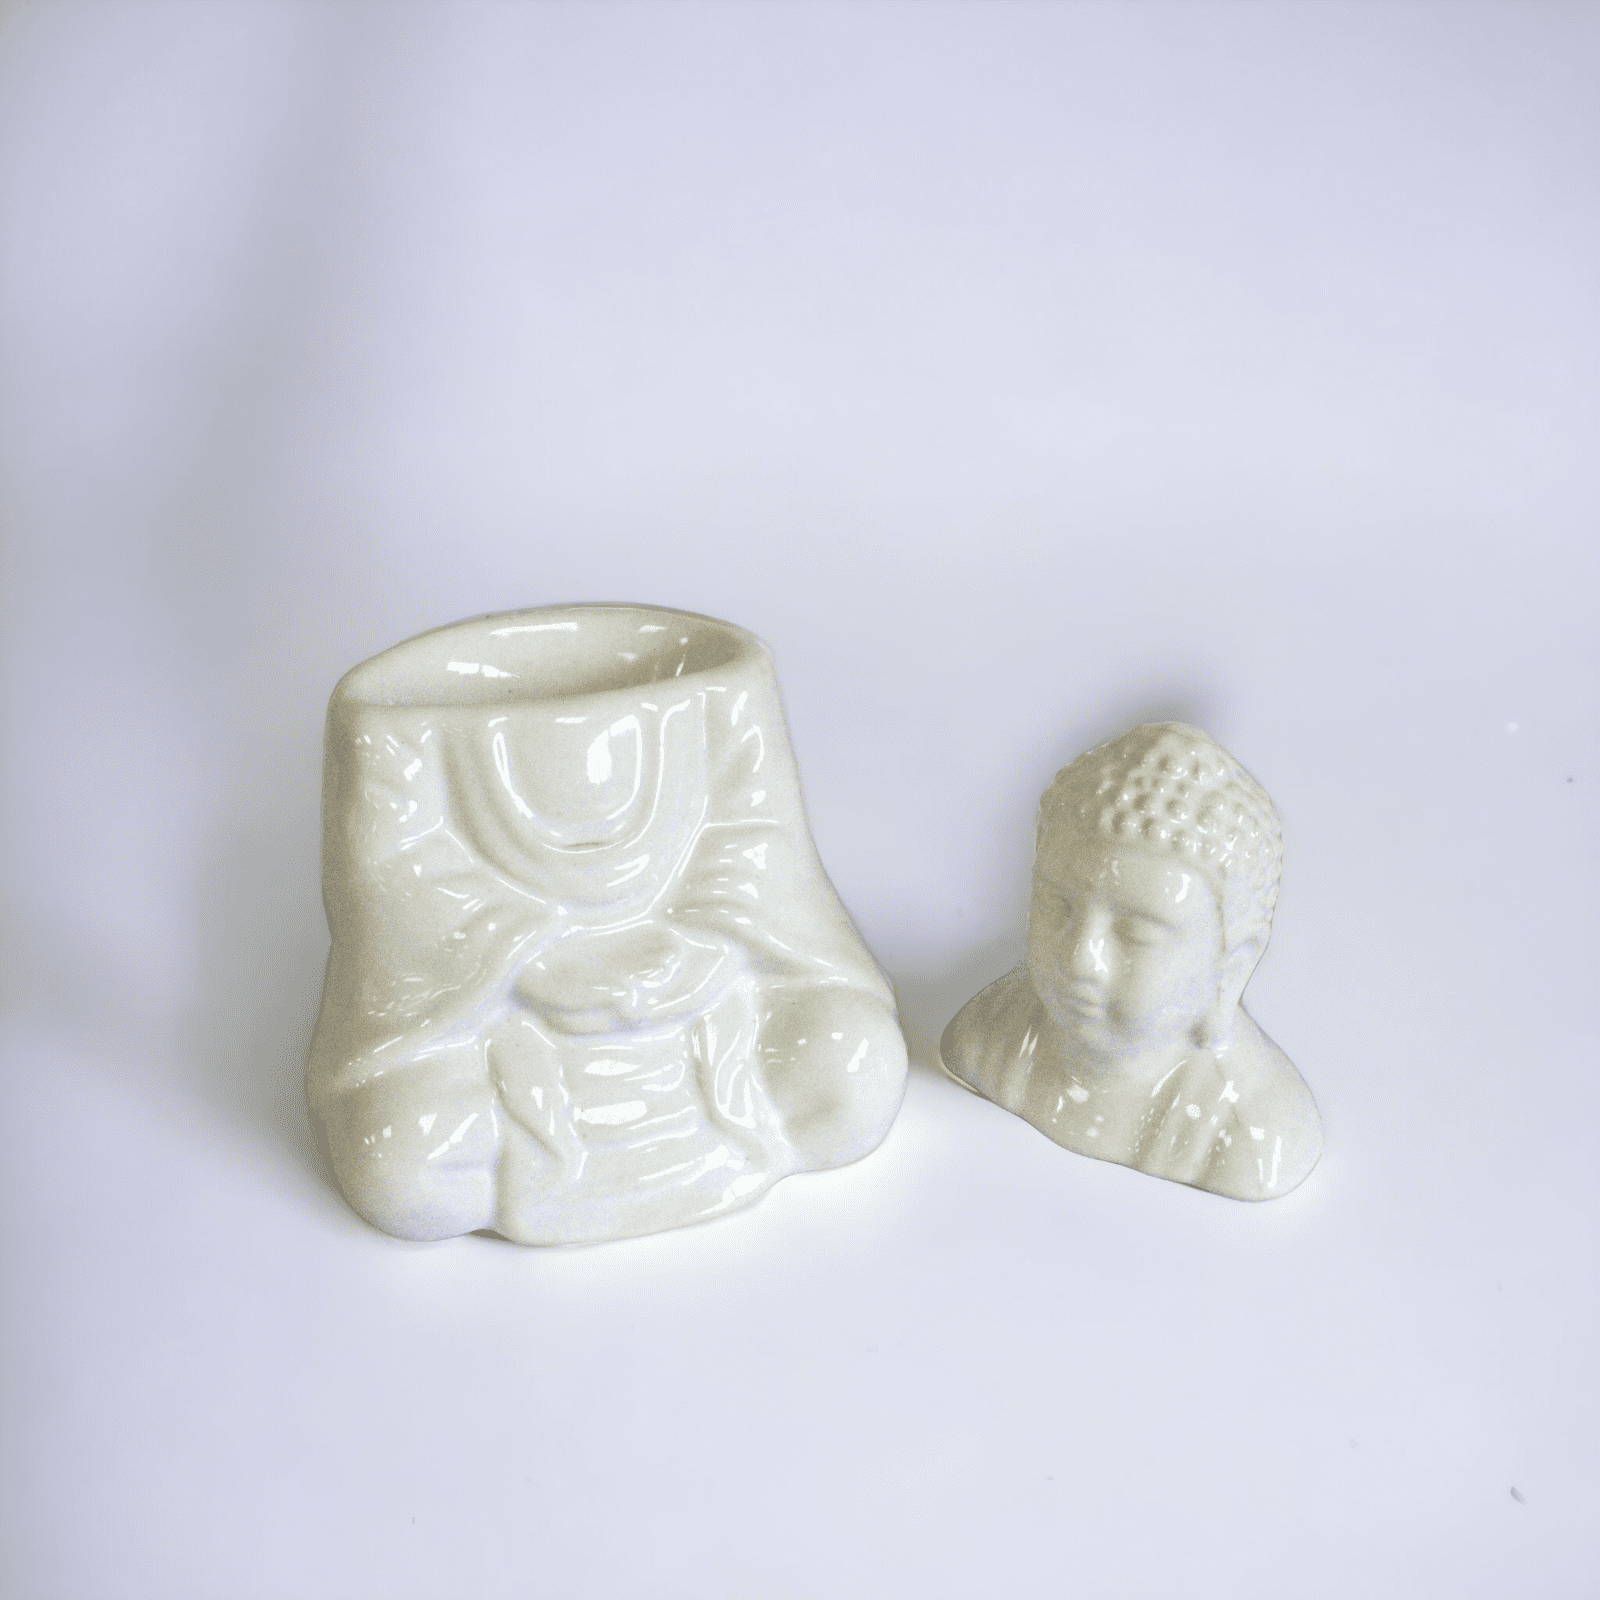 Wax Melter - Budha - Scent Stories